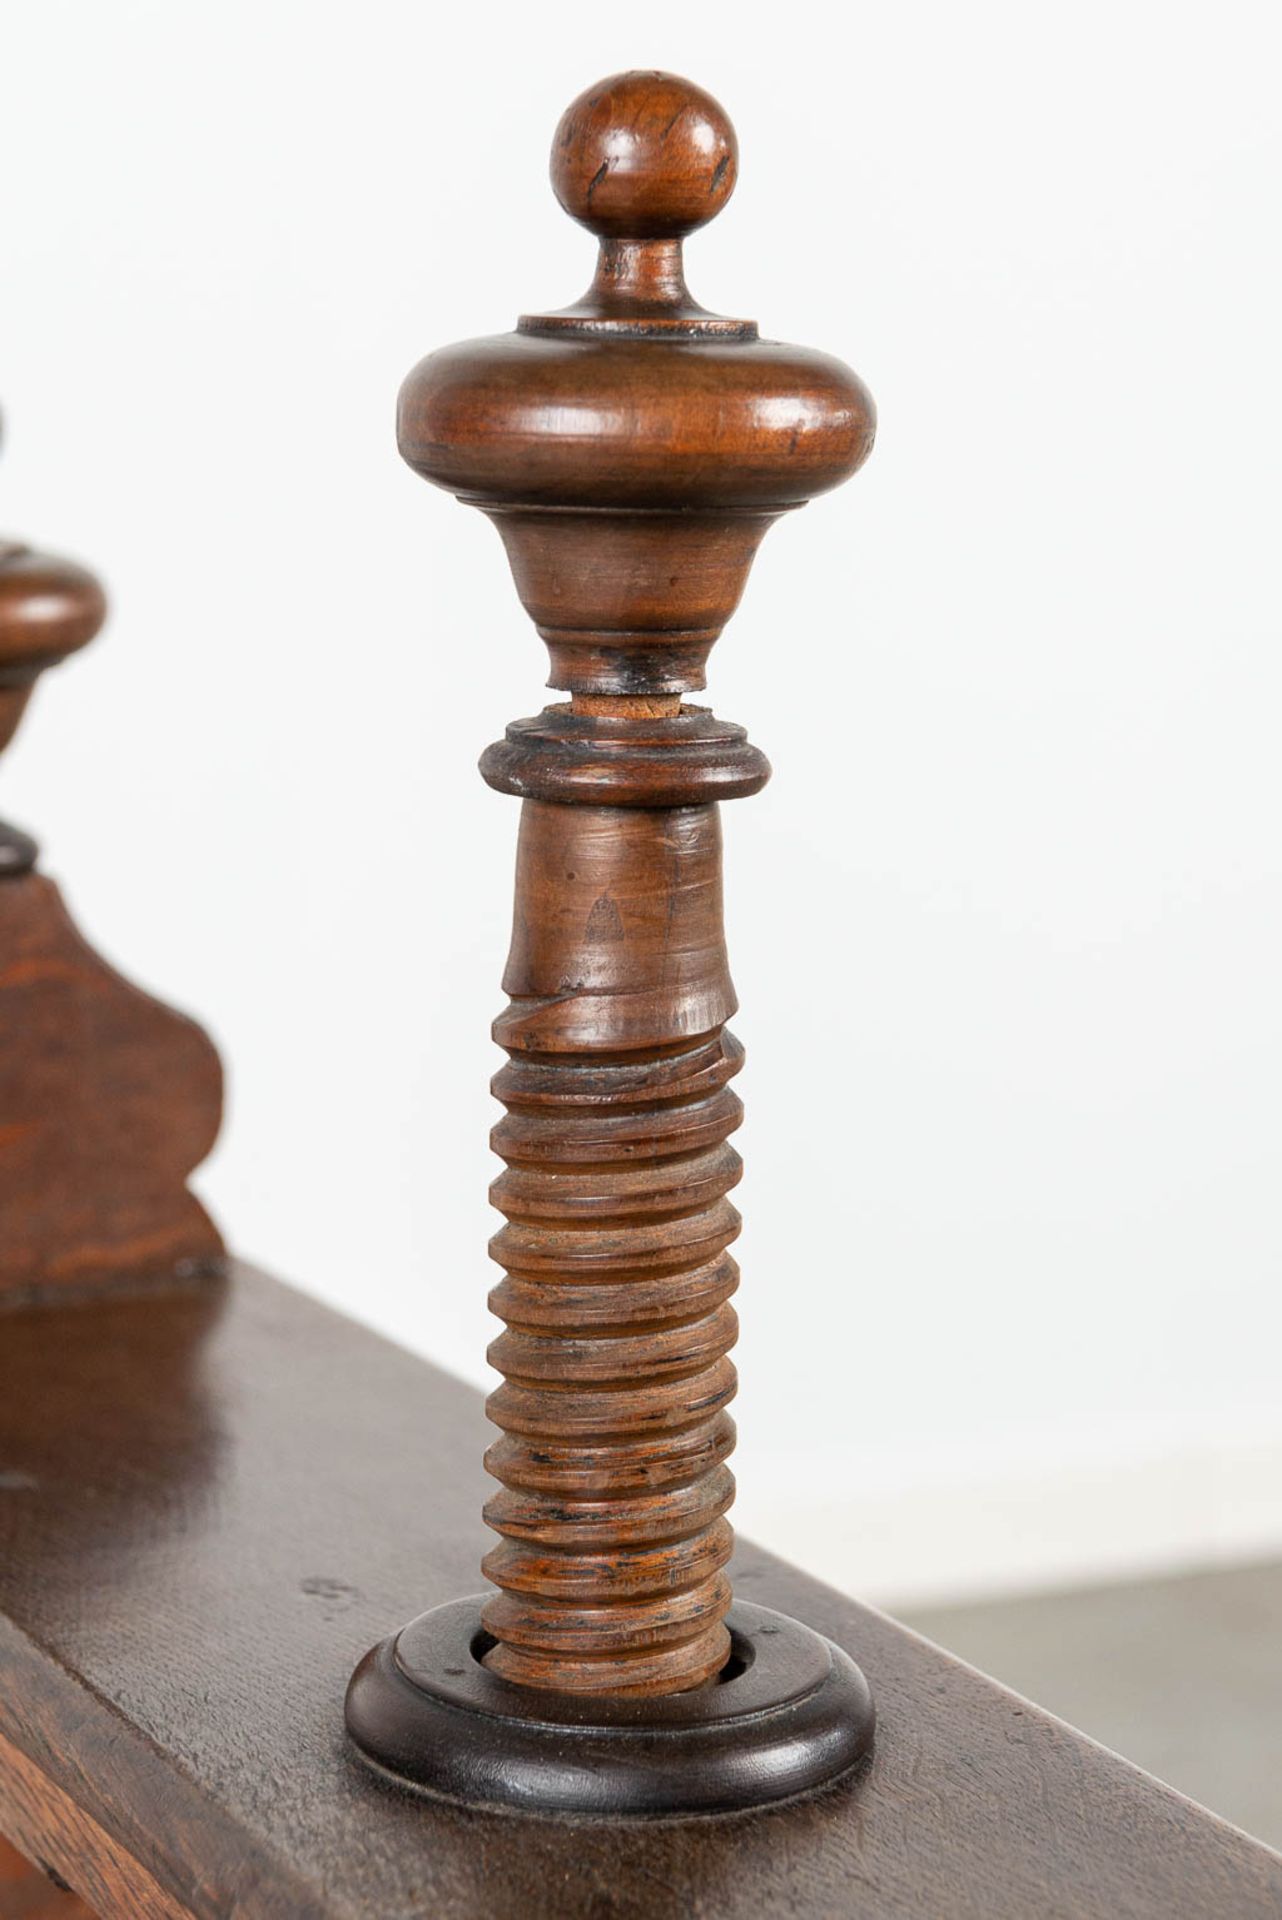 An antique linnen or book press, made of wood. - Image 4 of 7